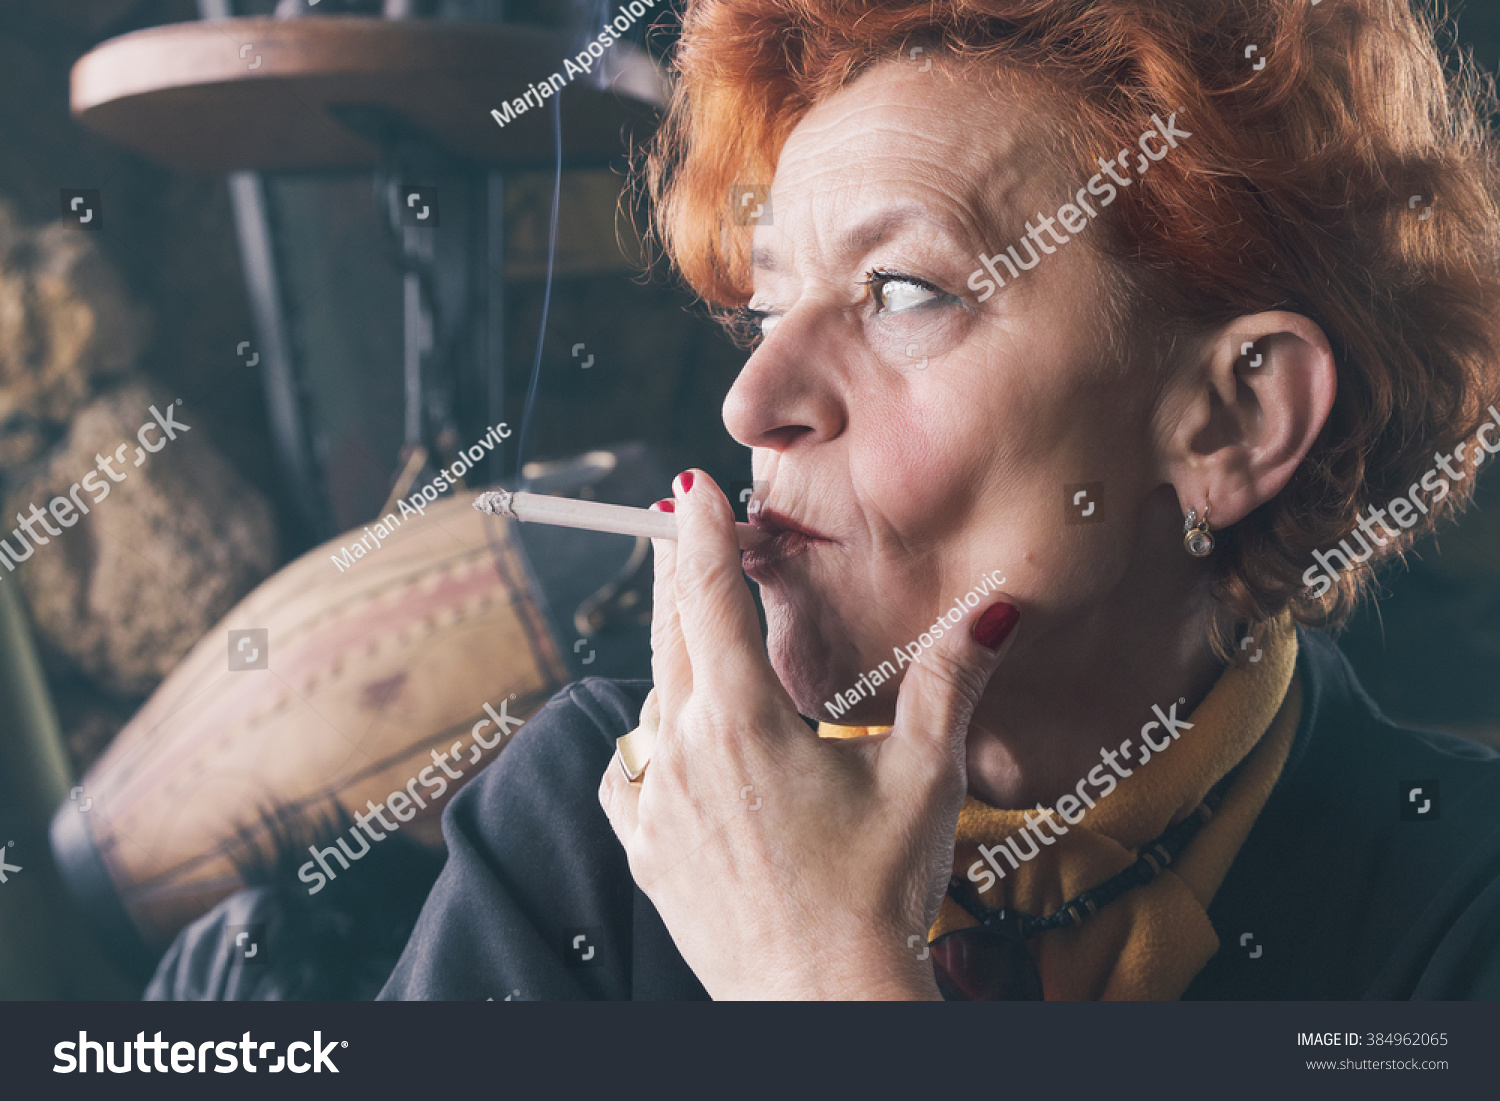 beverley tunnicliff recommends mature smoking women pic